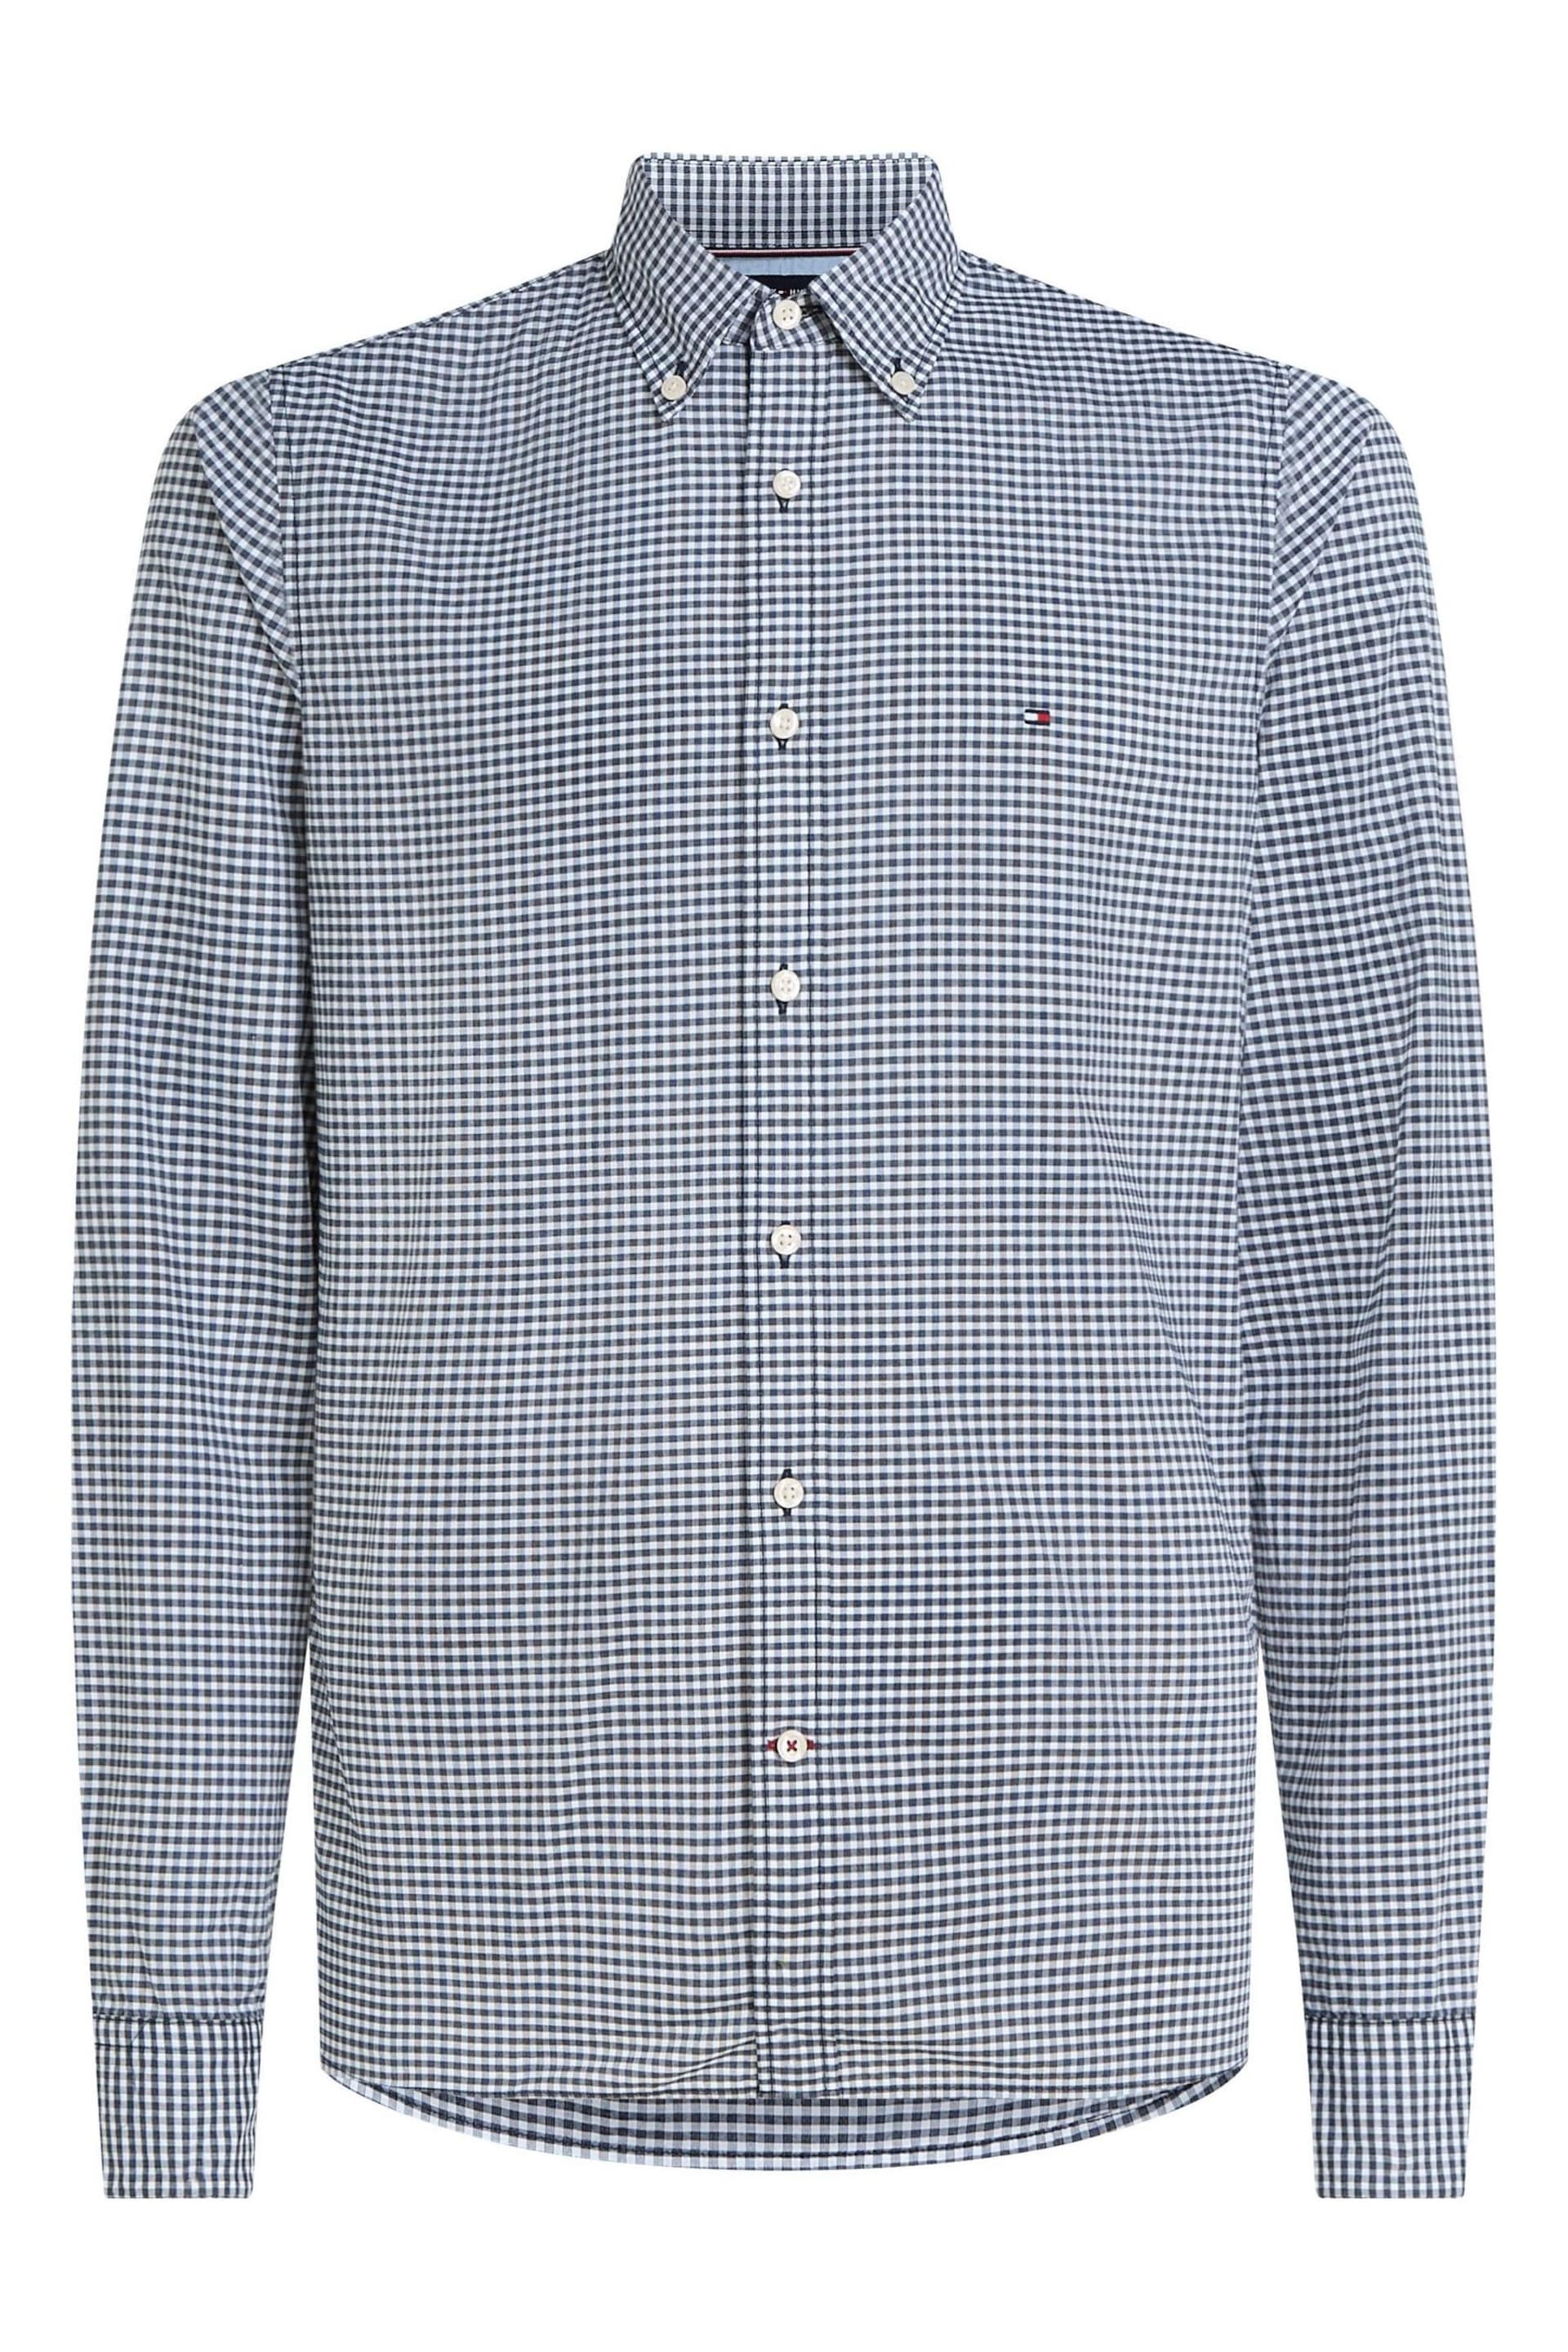 Tommy Hilfiger Blue B&T Textured Gingham Shirt - Image 1 of 4